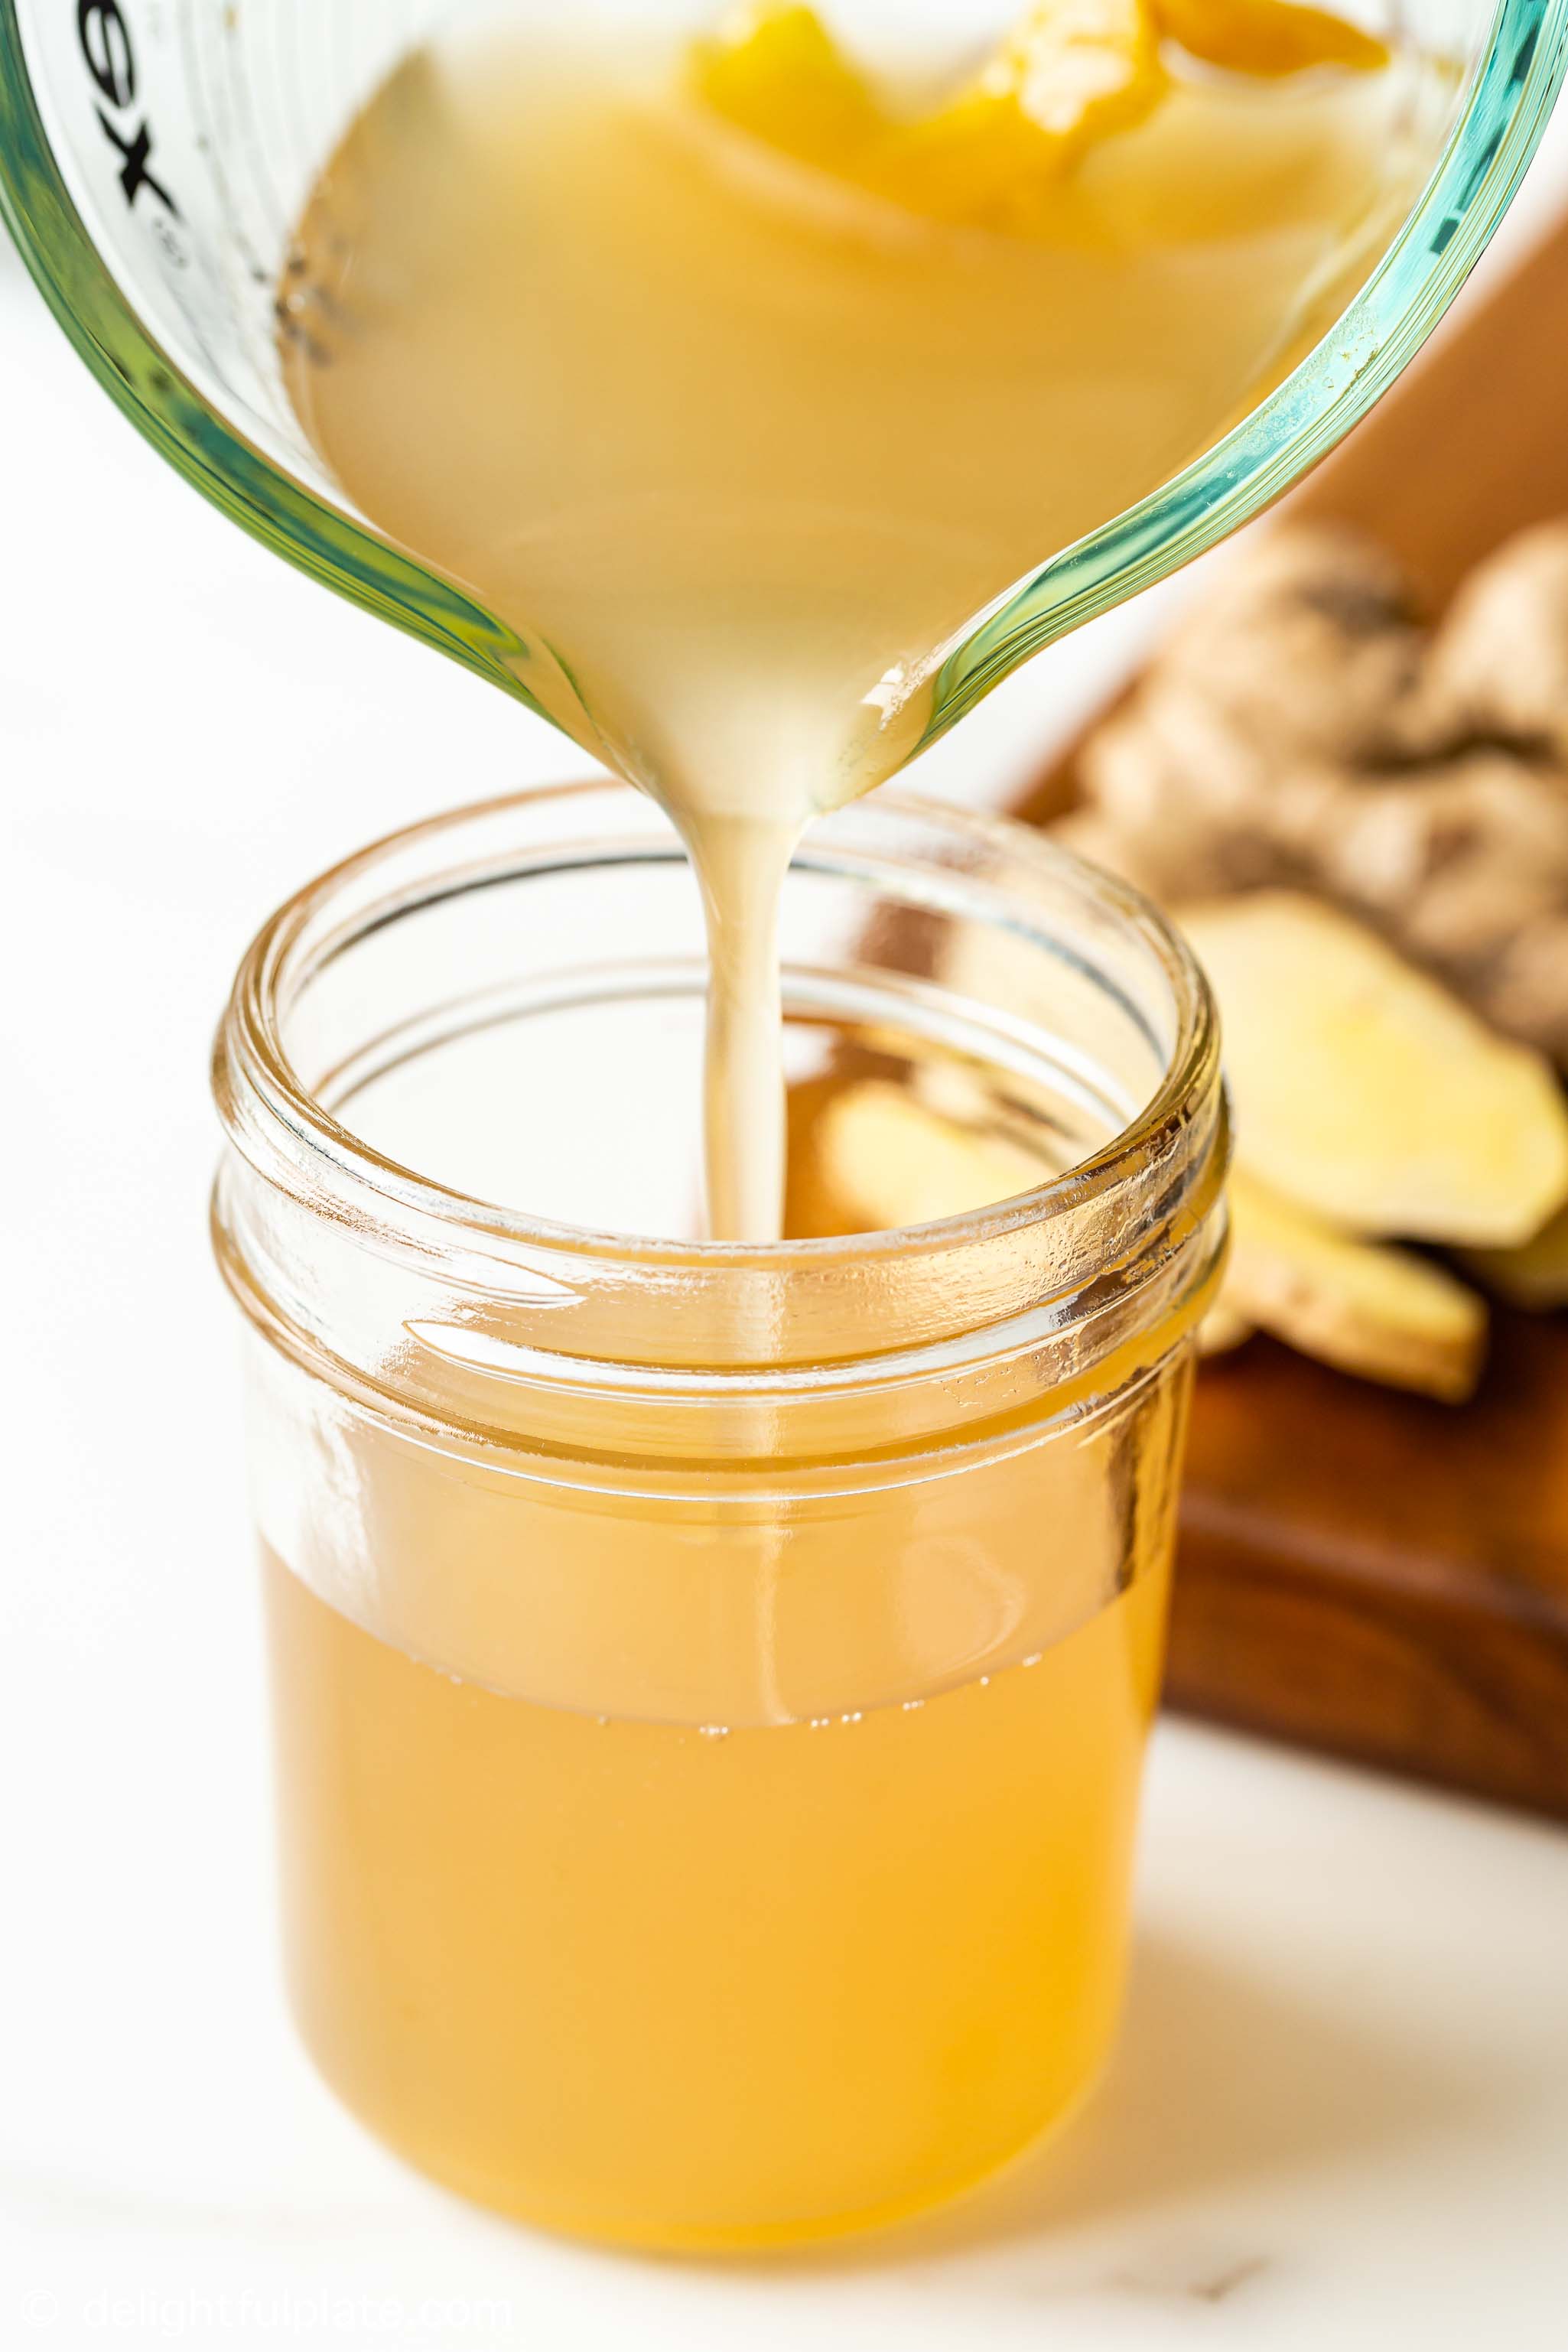 pouring ginger syrup into a jar